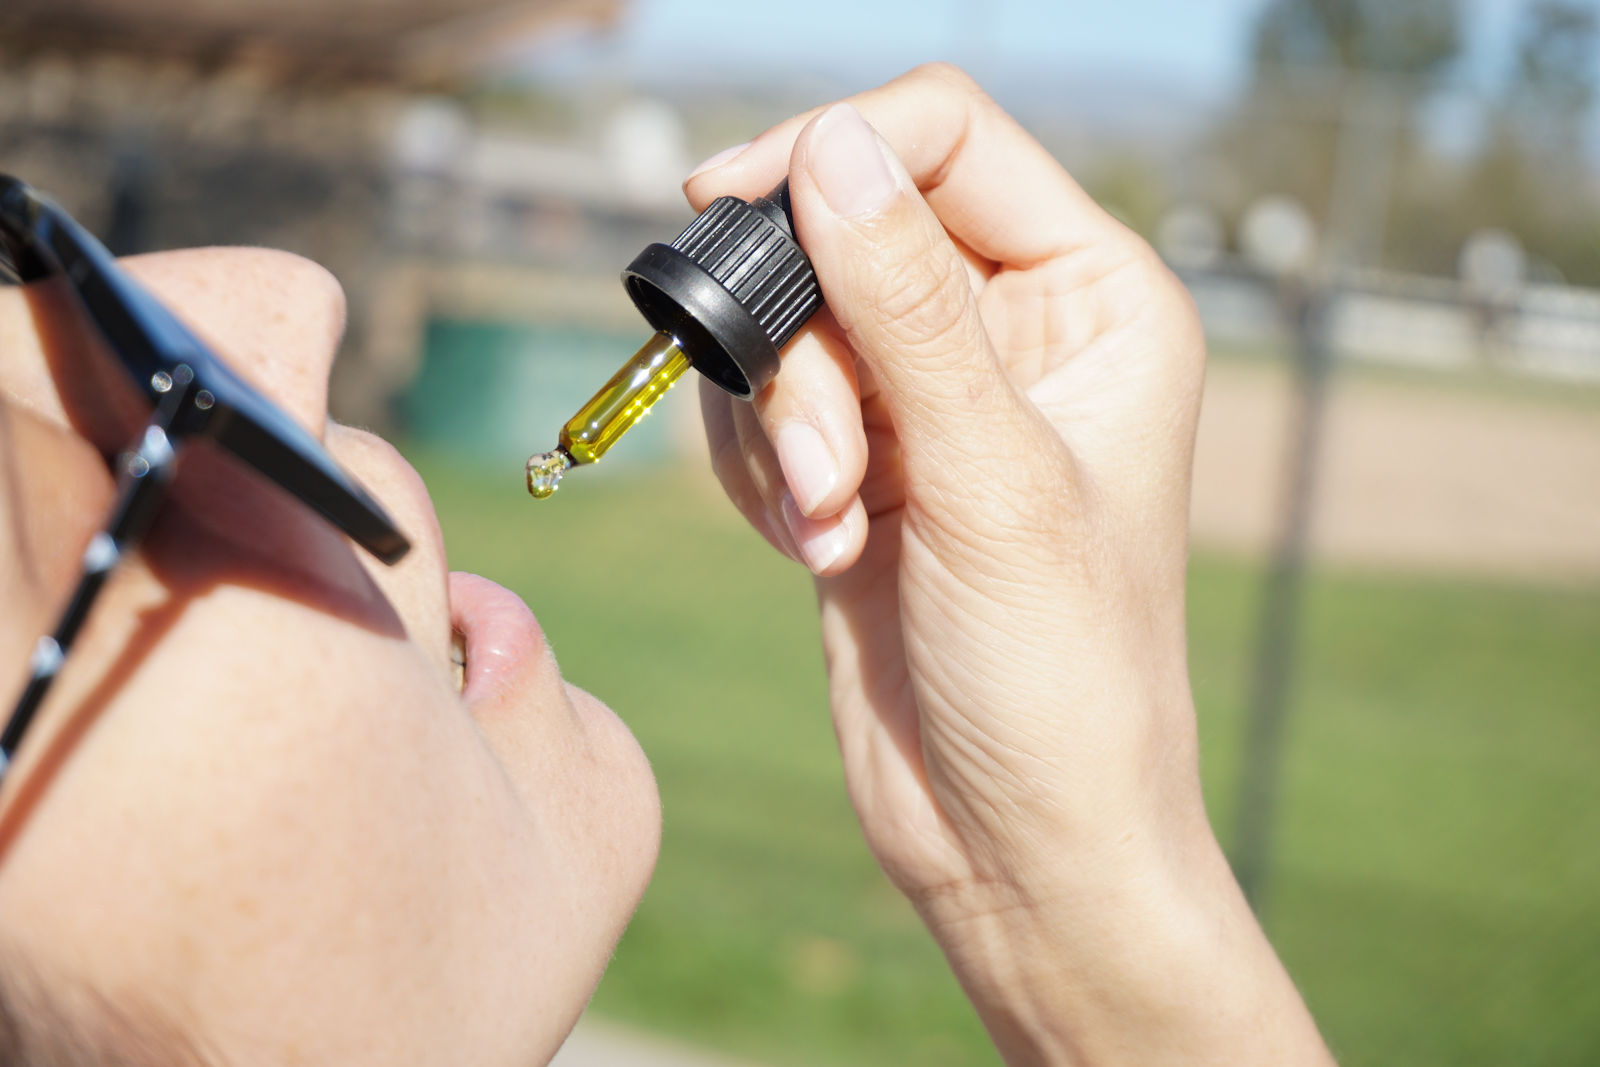 Is CBD legal? Yes. Here's a woman taking CBD oil.